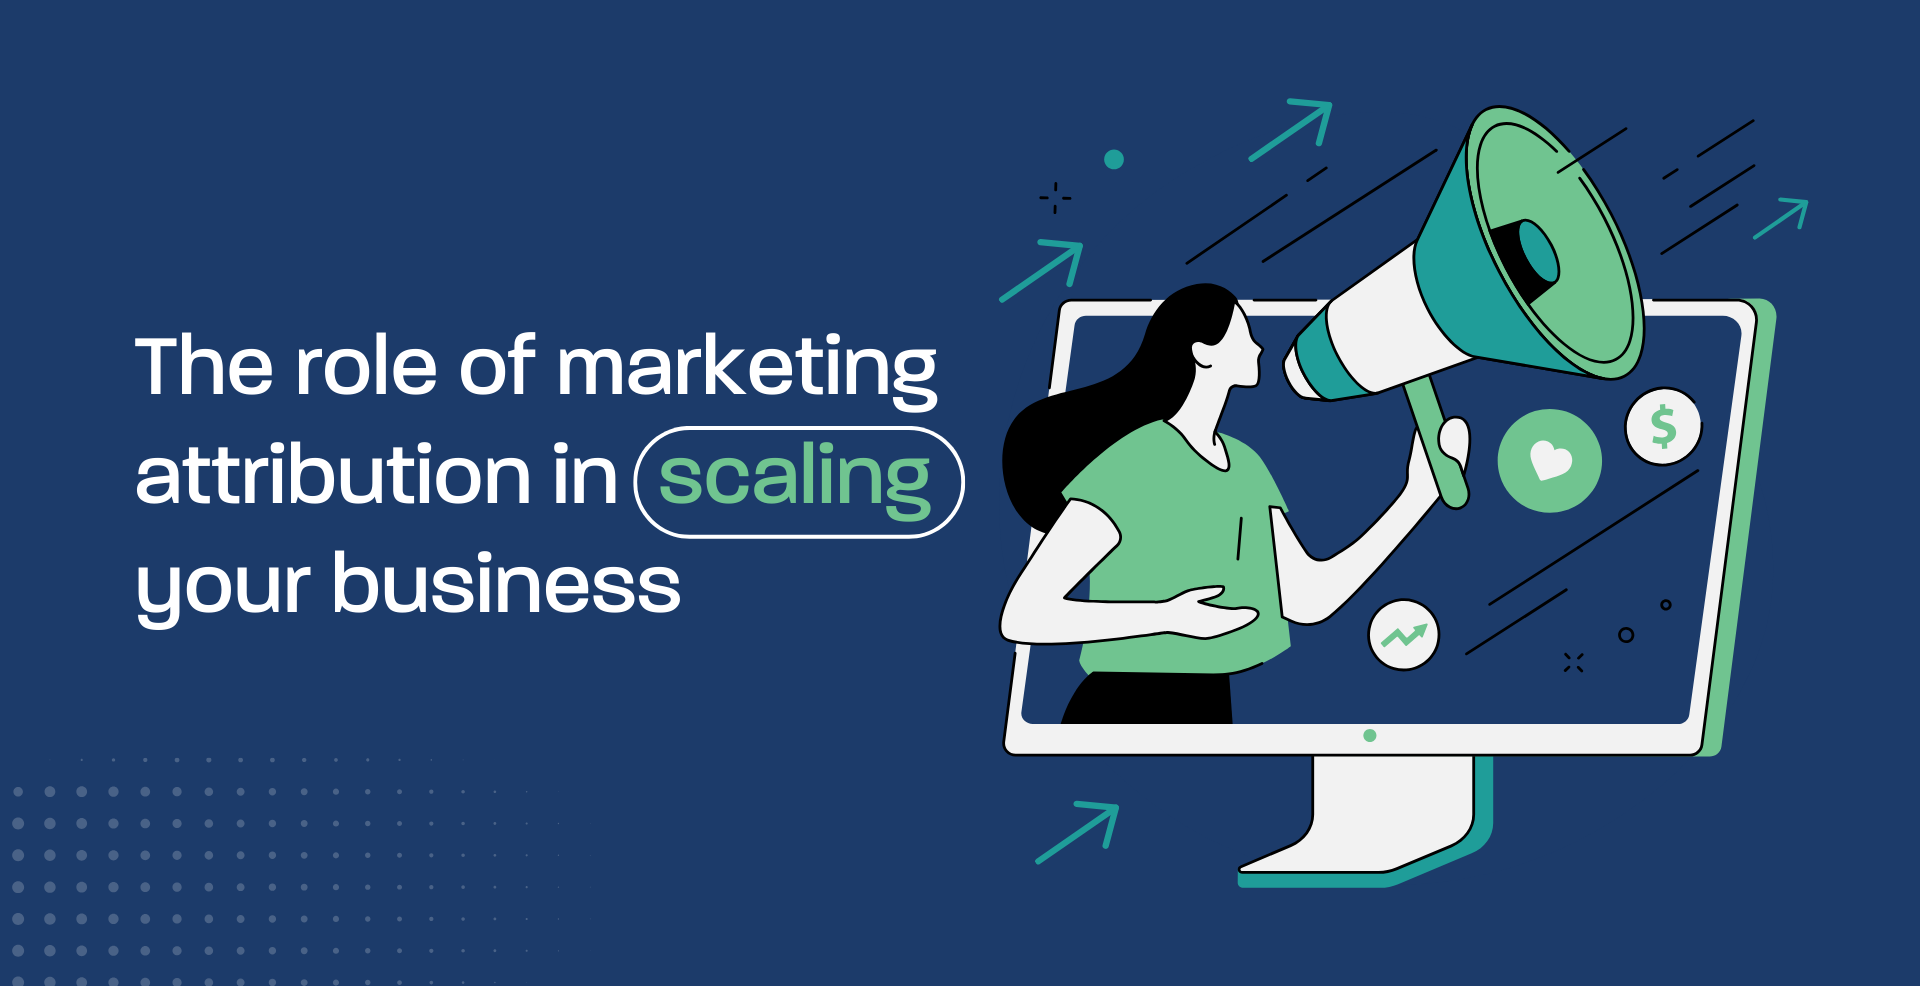 The role of marketing attribution in scaling your business